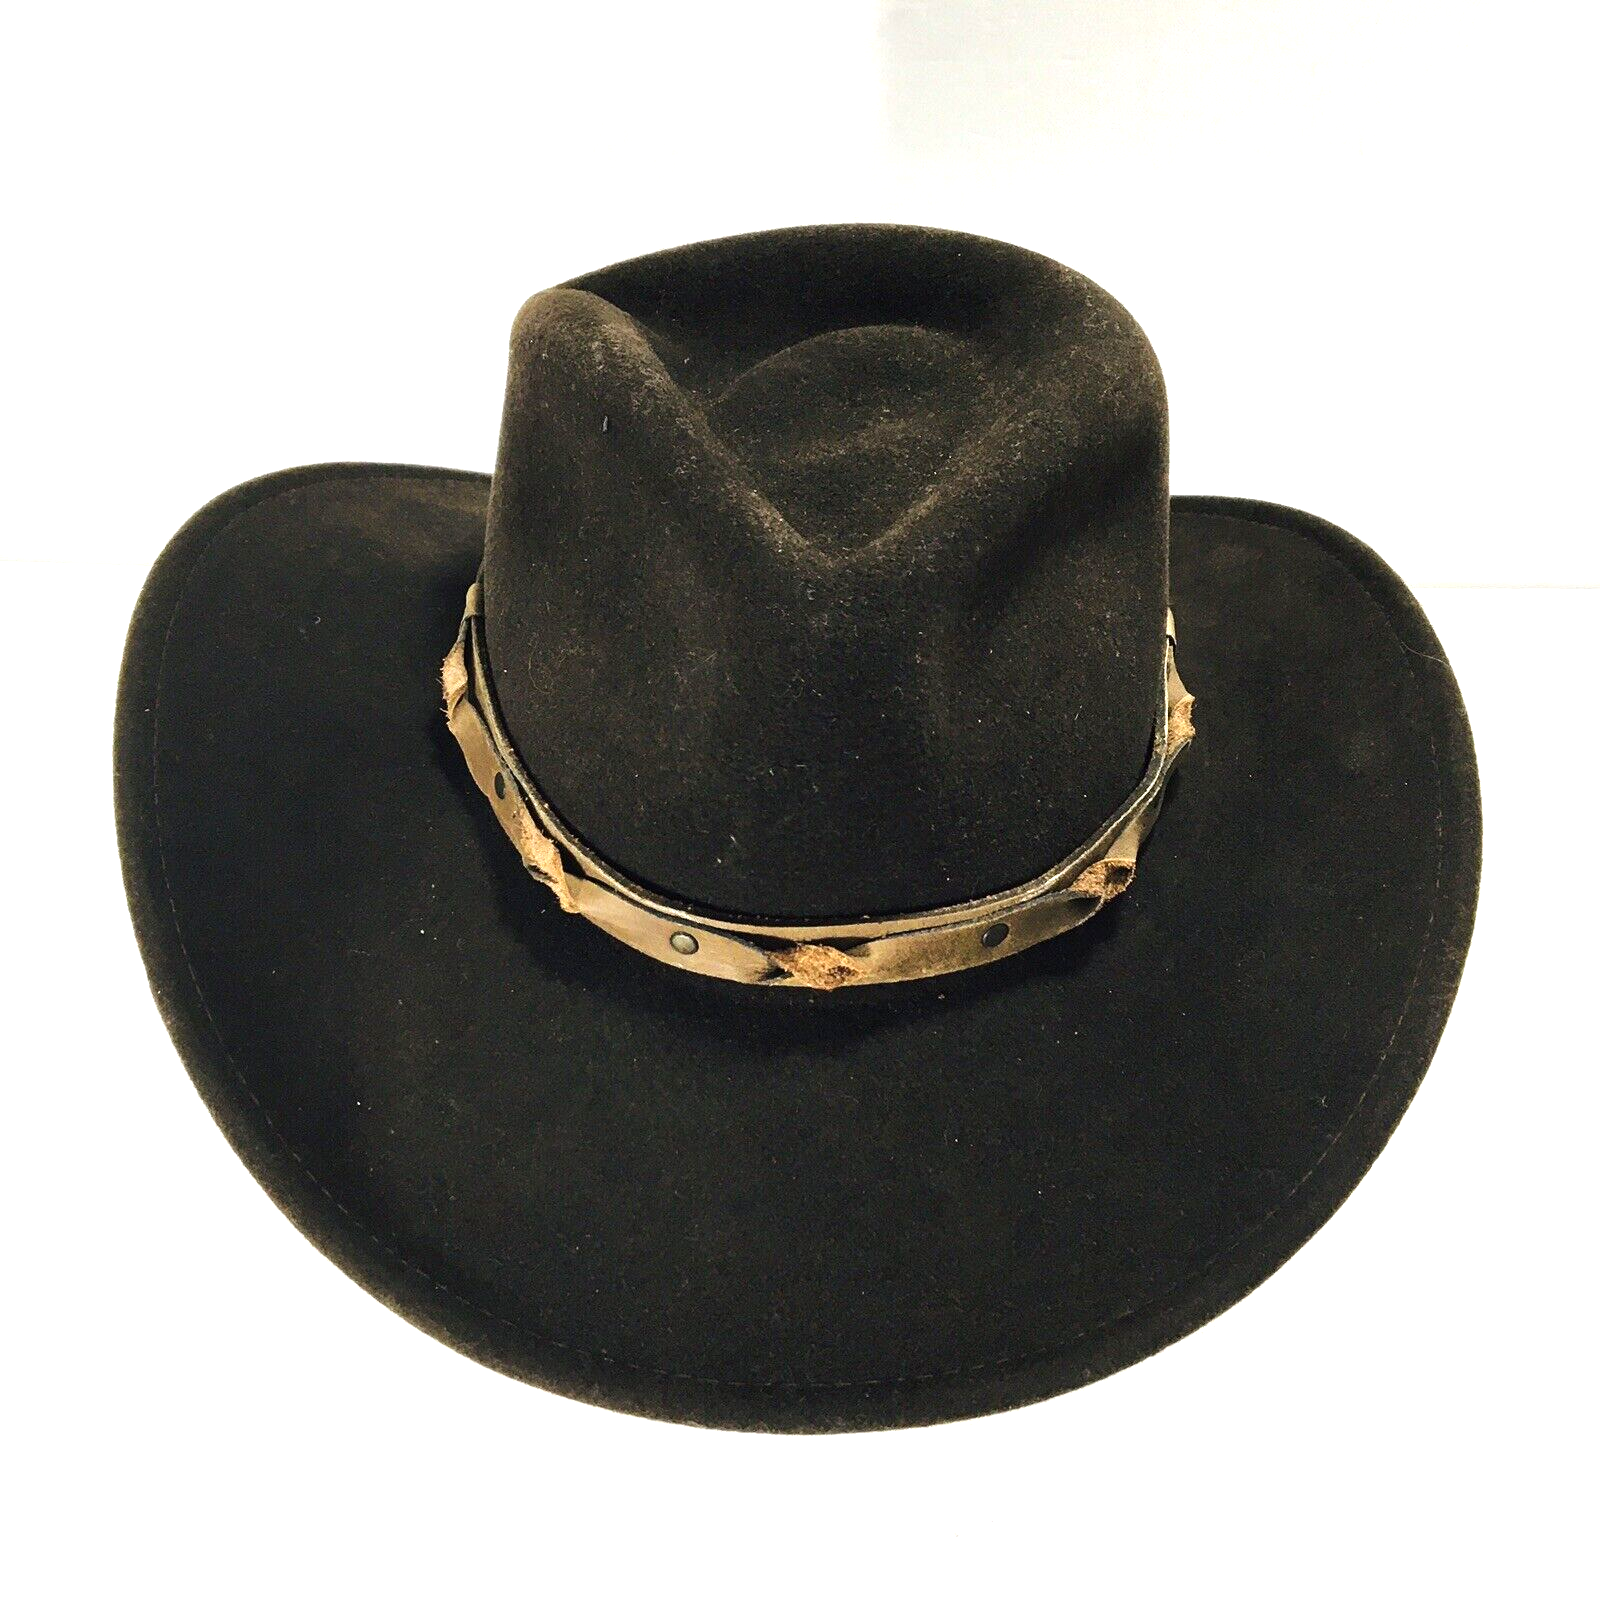 Primary image for Wind River By Bailey Lite Felt Wool Brown Cowboy Hat USA Renegade Band Size S